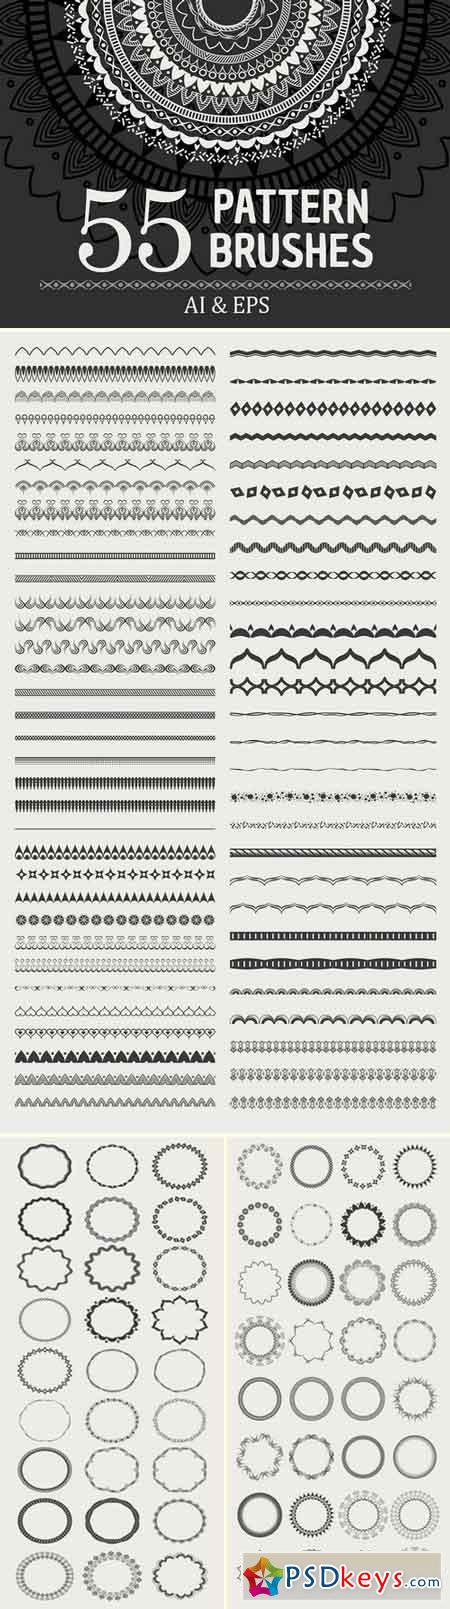 55 Vector Patterns Brushes 2915269